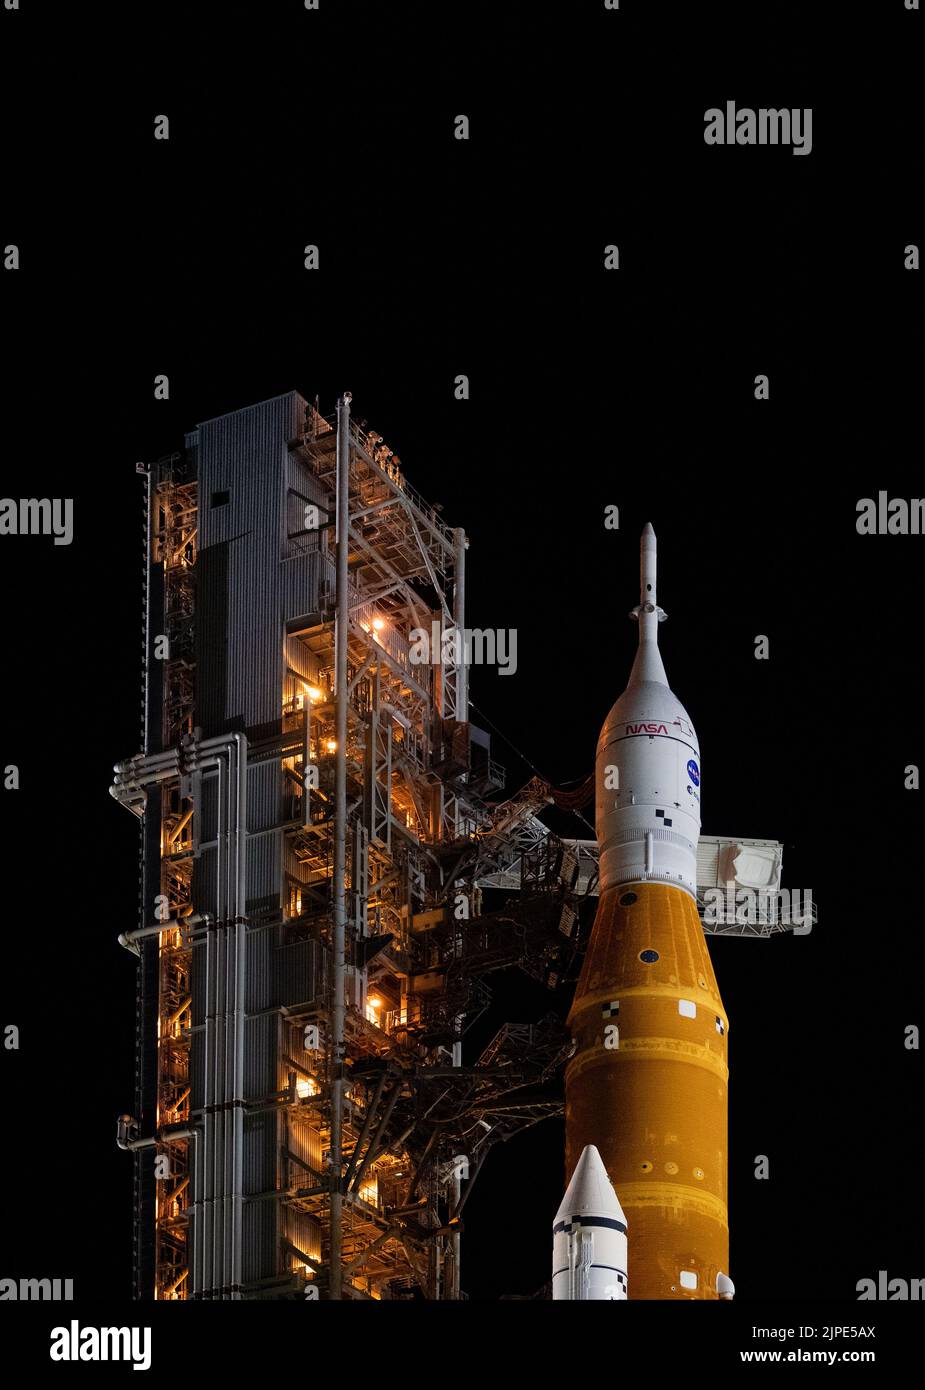 Florida, USA. 16th Aug, 2022. Artemis: NASA readies giant Moon rocket for maiden flight. . NASA’s Space Launch System (SLS) rocket with the Orion spacecraft aboard is seen atop a mobile launcher as the crew access arm is swung into position for rollout to Launch Pad 39B, 16 AUGUST 2022, at NASA’s Kennedy Space Center in Florida. NASA’s Artemis I mission is the first integrated test of the agency’s deep space exploration systems: the Orion spacecraft, SLS rocket, and supporting ground systems. 16 August 2022  Credit: NASA/Joel Kowsky / Alamy Live News via Digitaleye Credit: J Marshall - Tribale Stock Photo